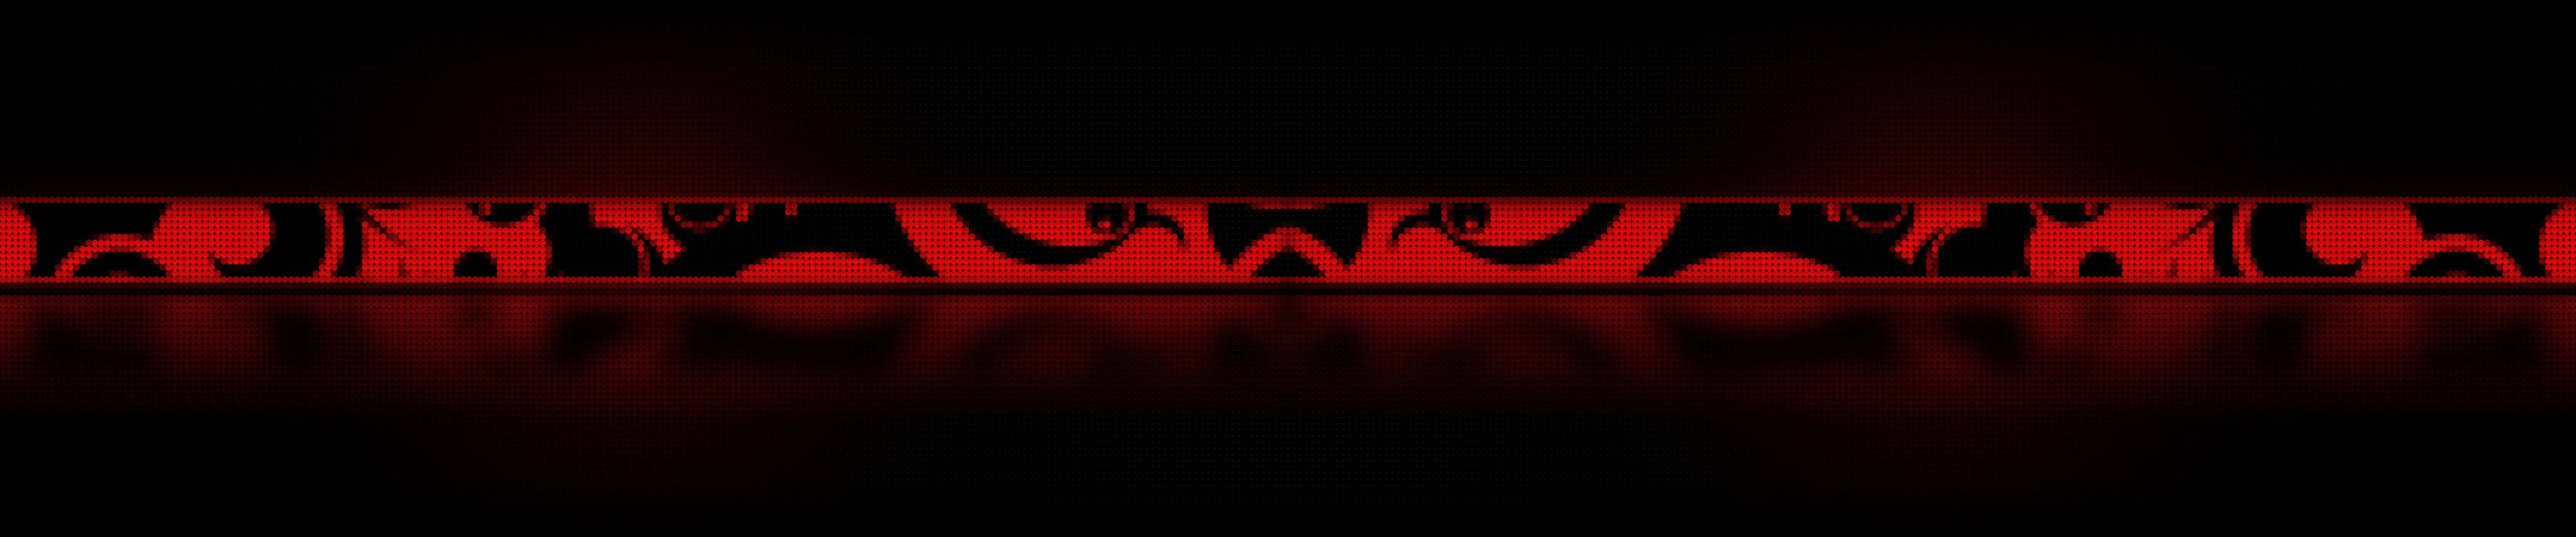 Triple Monitor Red Background